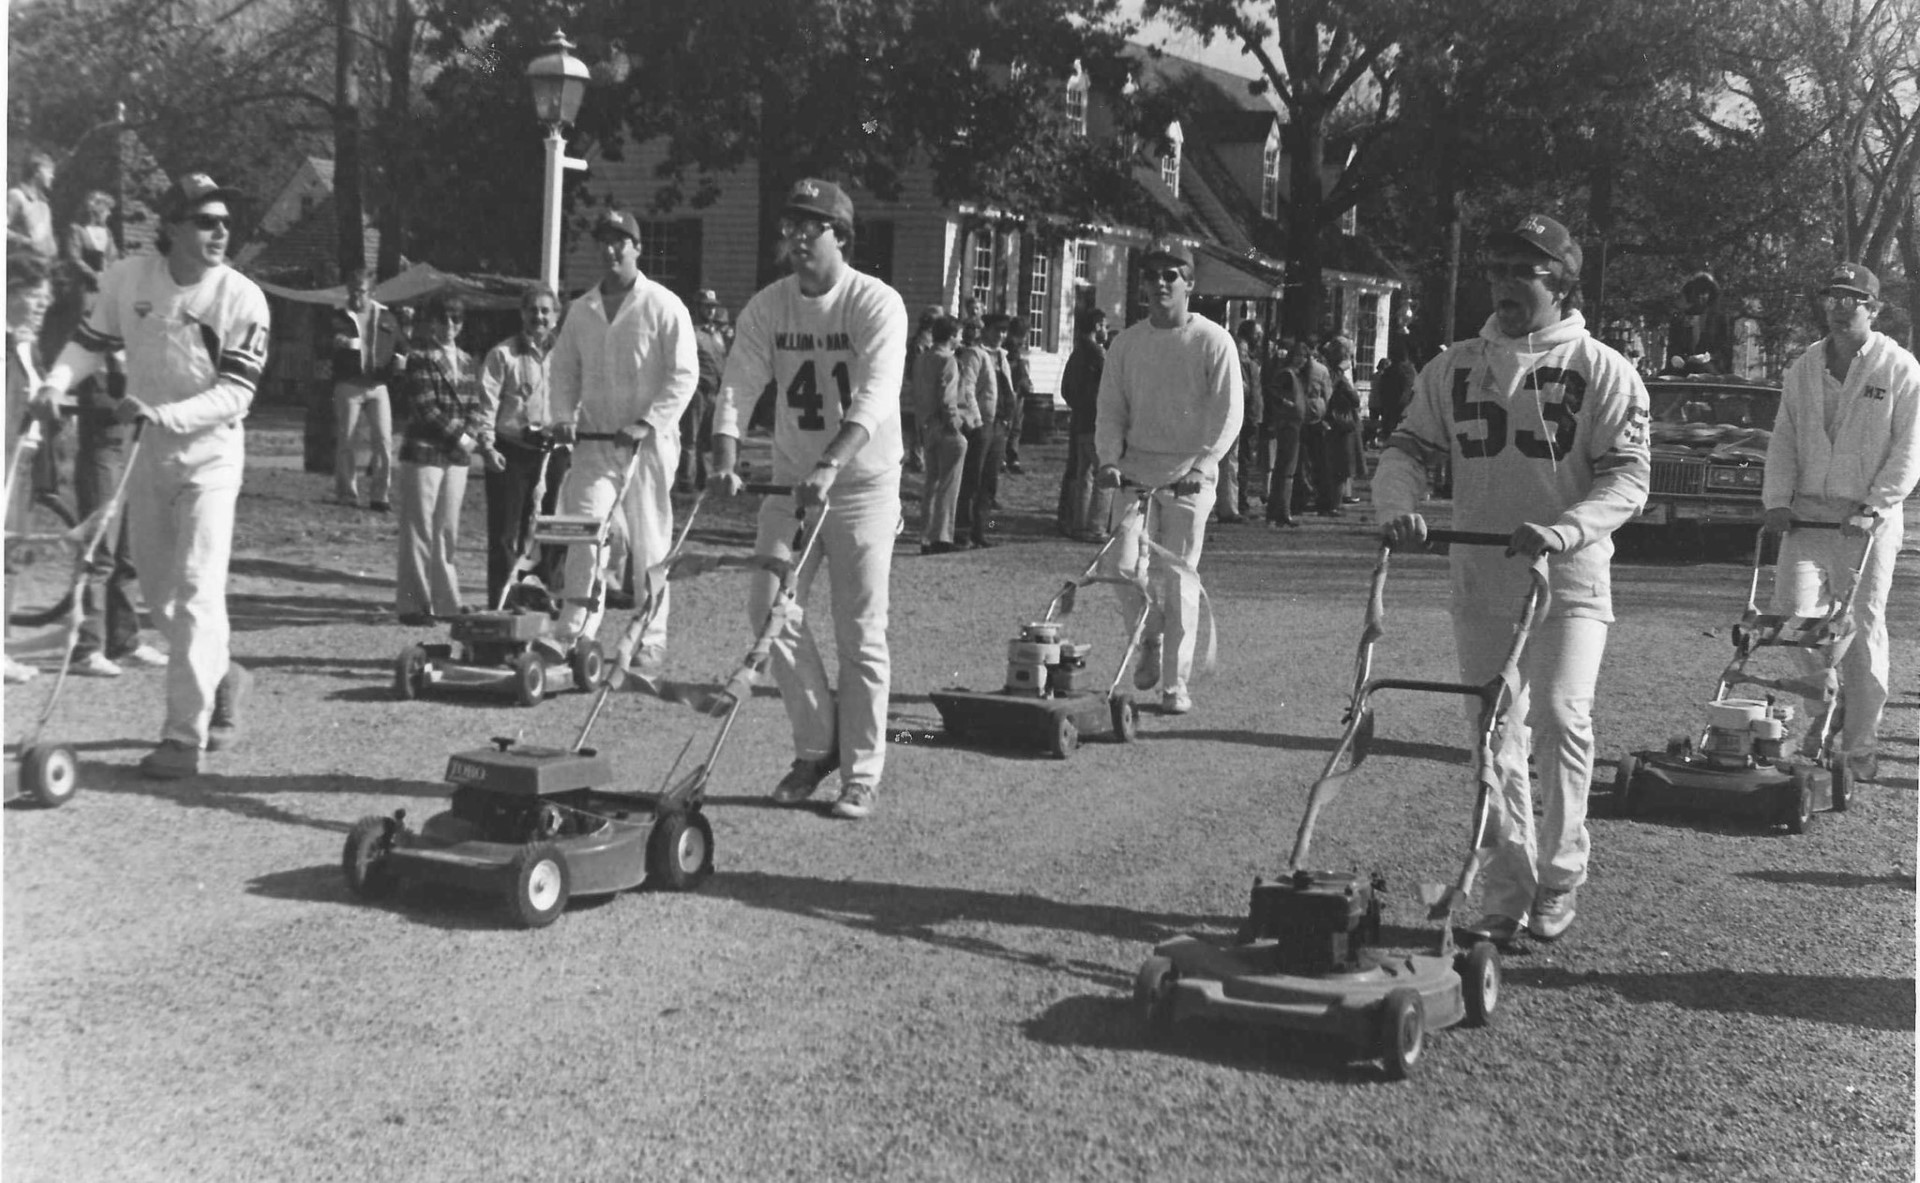 Old Photograph of Lawnmowers at William and Mary Homecoming Parade